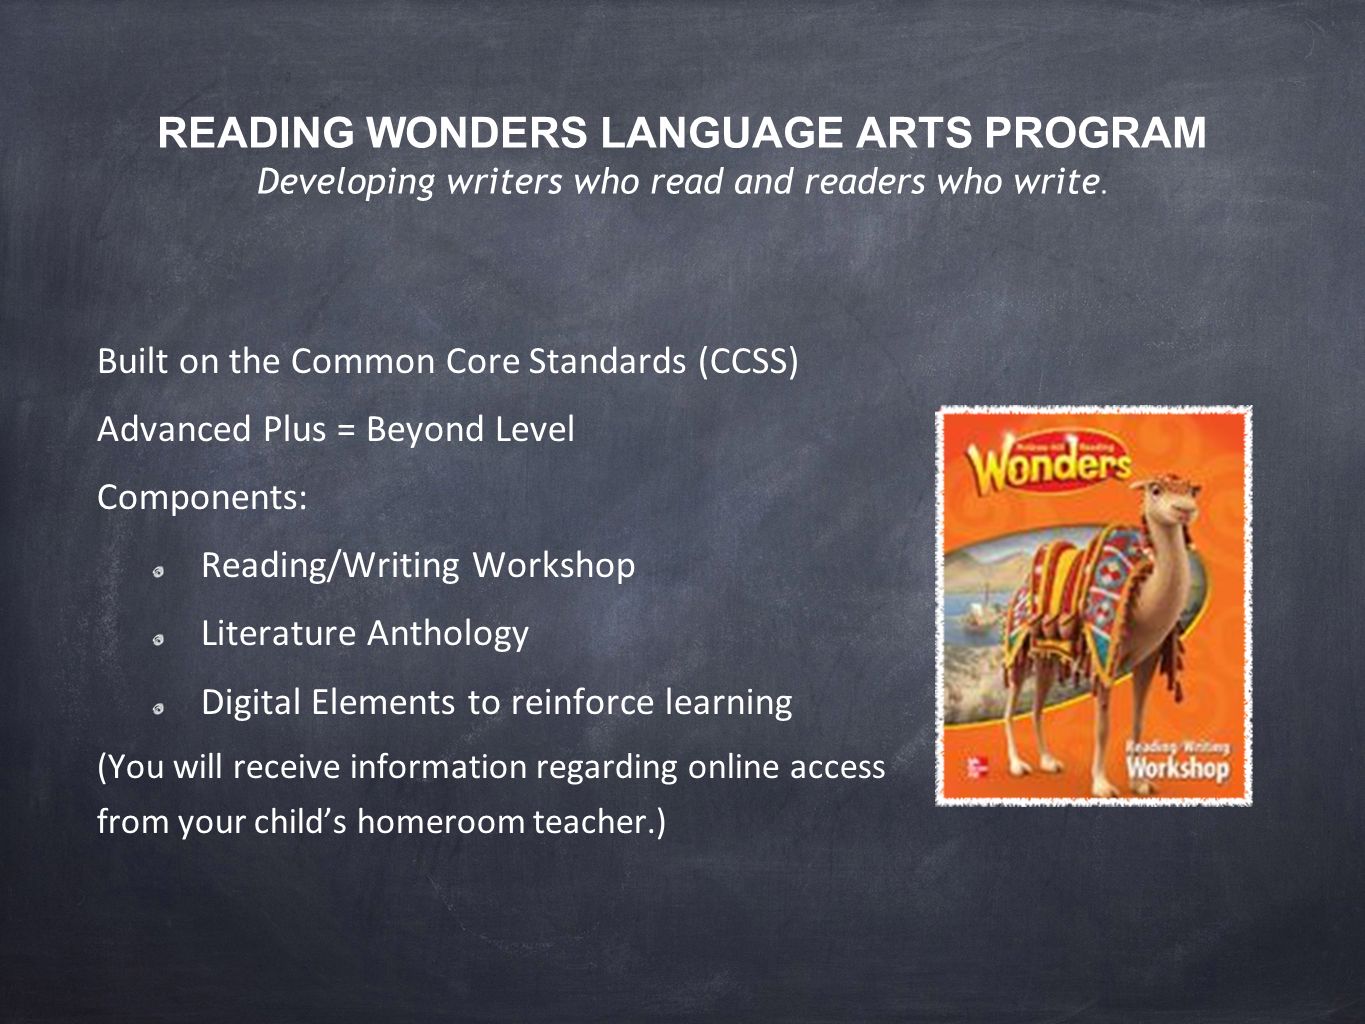 READING WONDERS LANGUAGE ARTS PROGRAM Developing writers who read and readers who write.